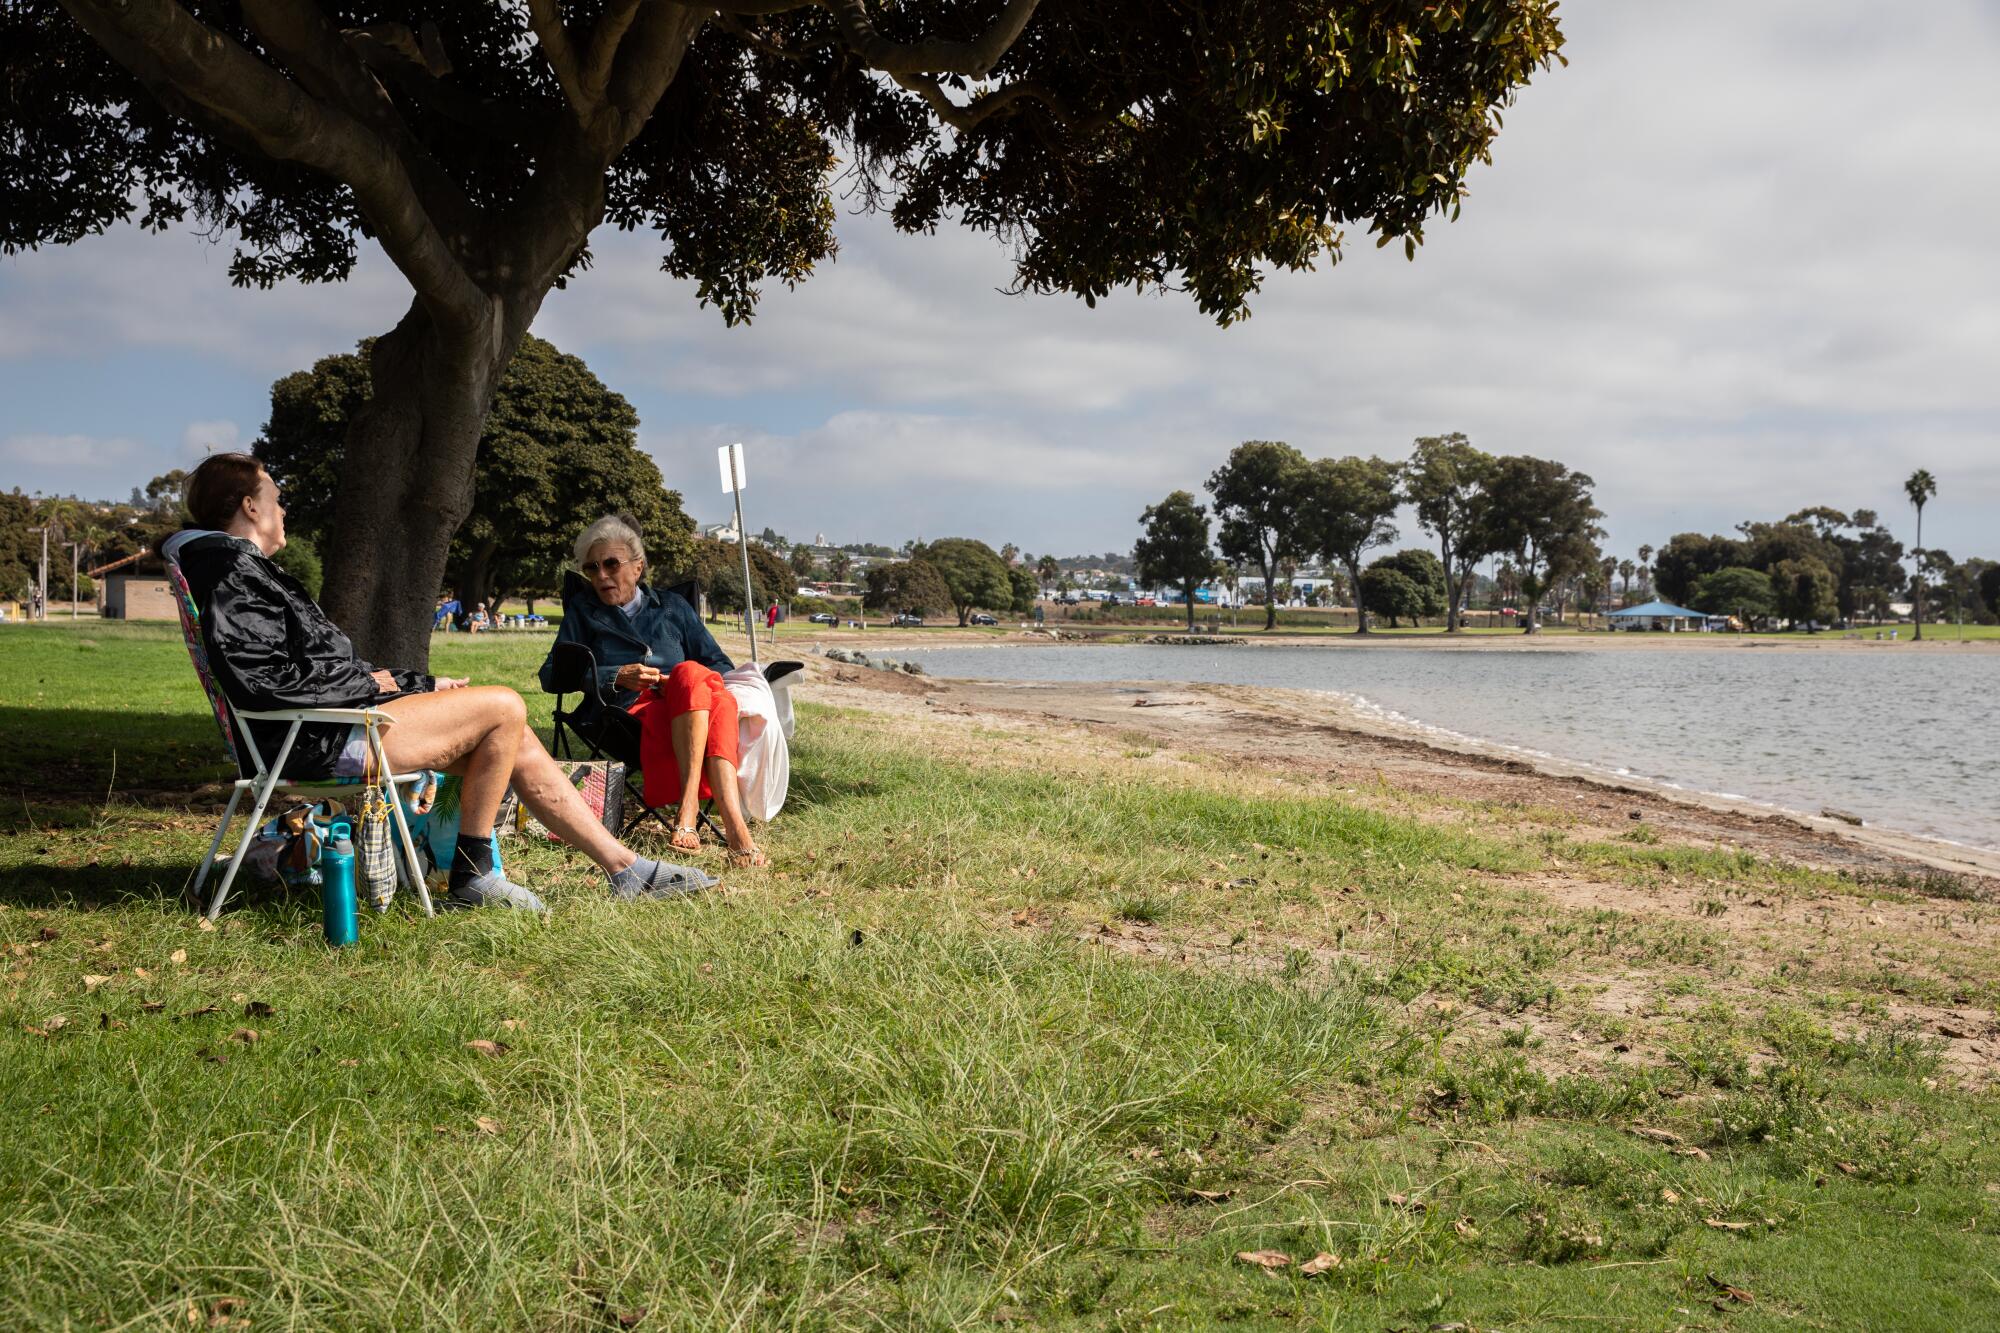 Two women sit on folding chairs on the grass beneath the shade of a tree next to a bay.